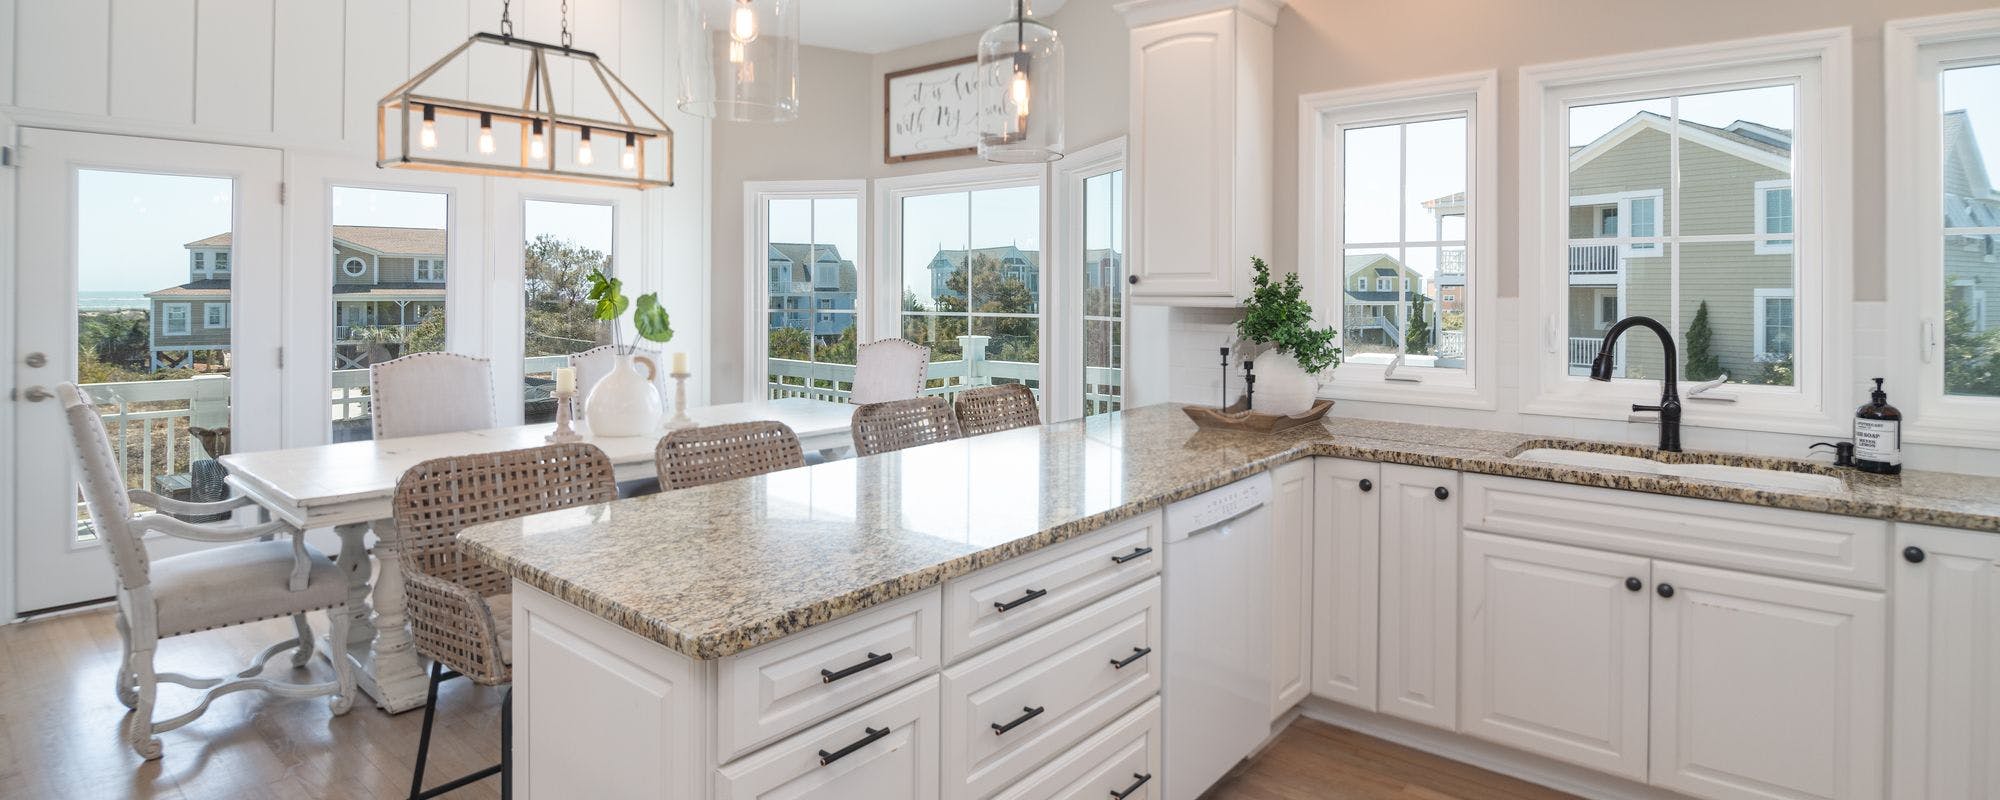 Kitchen and dining area in Holden Beach vacation rental